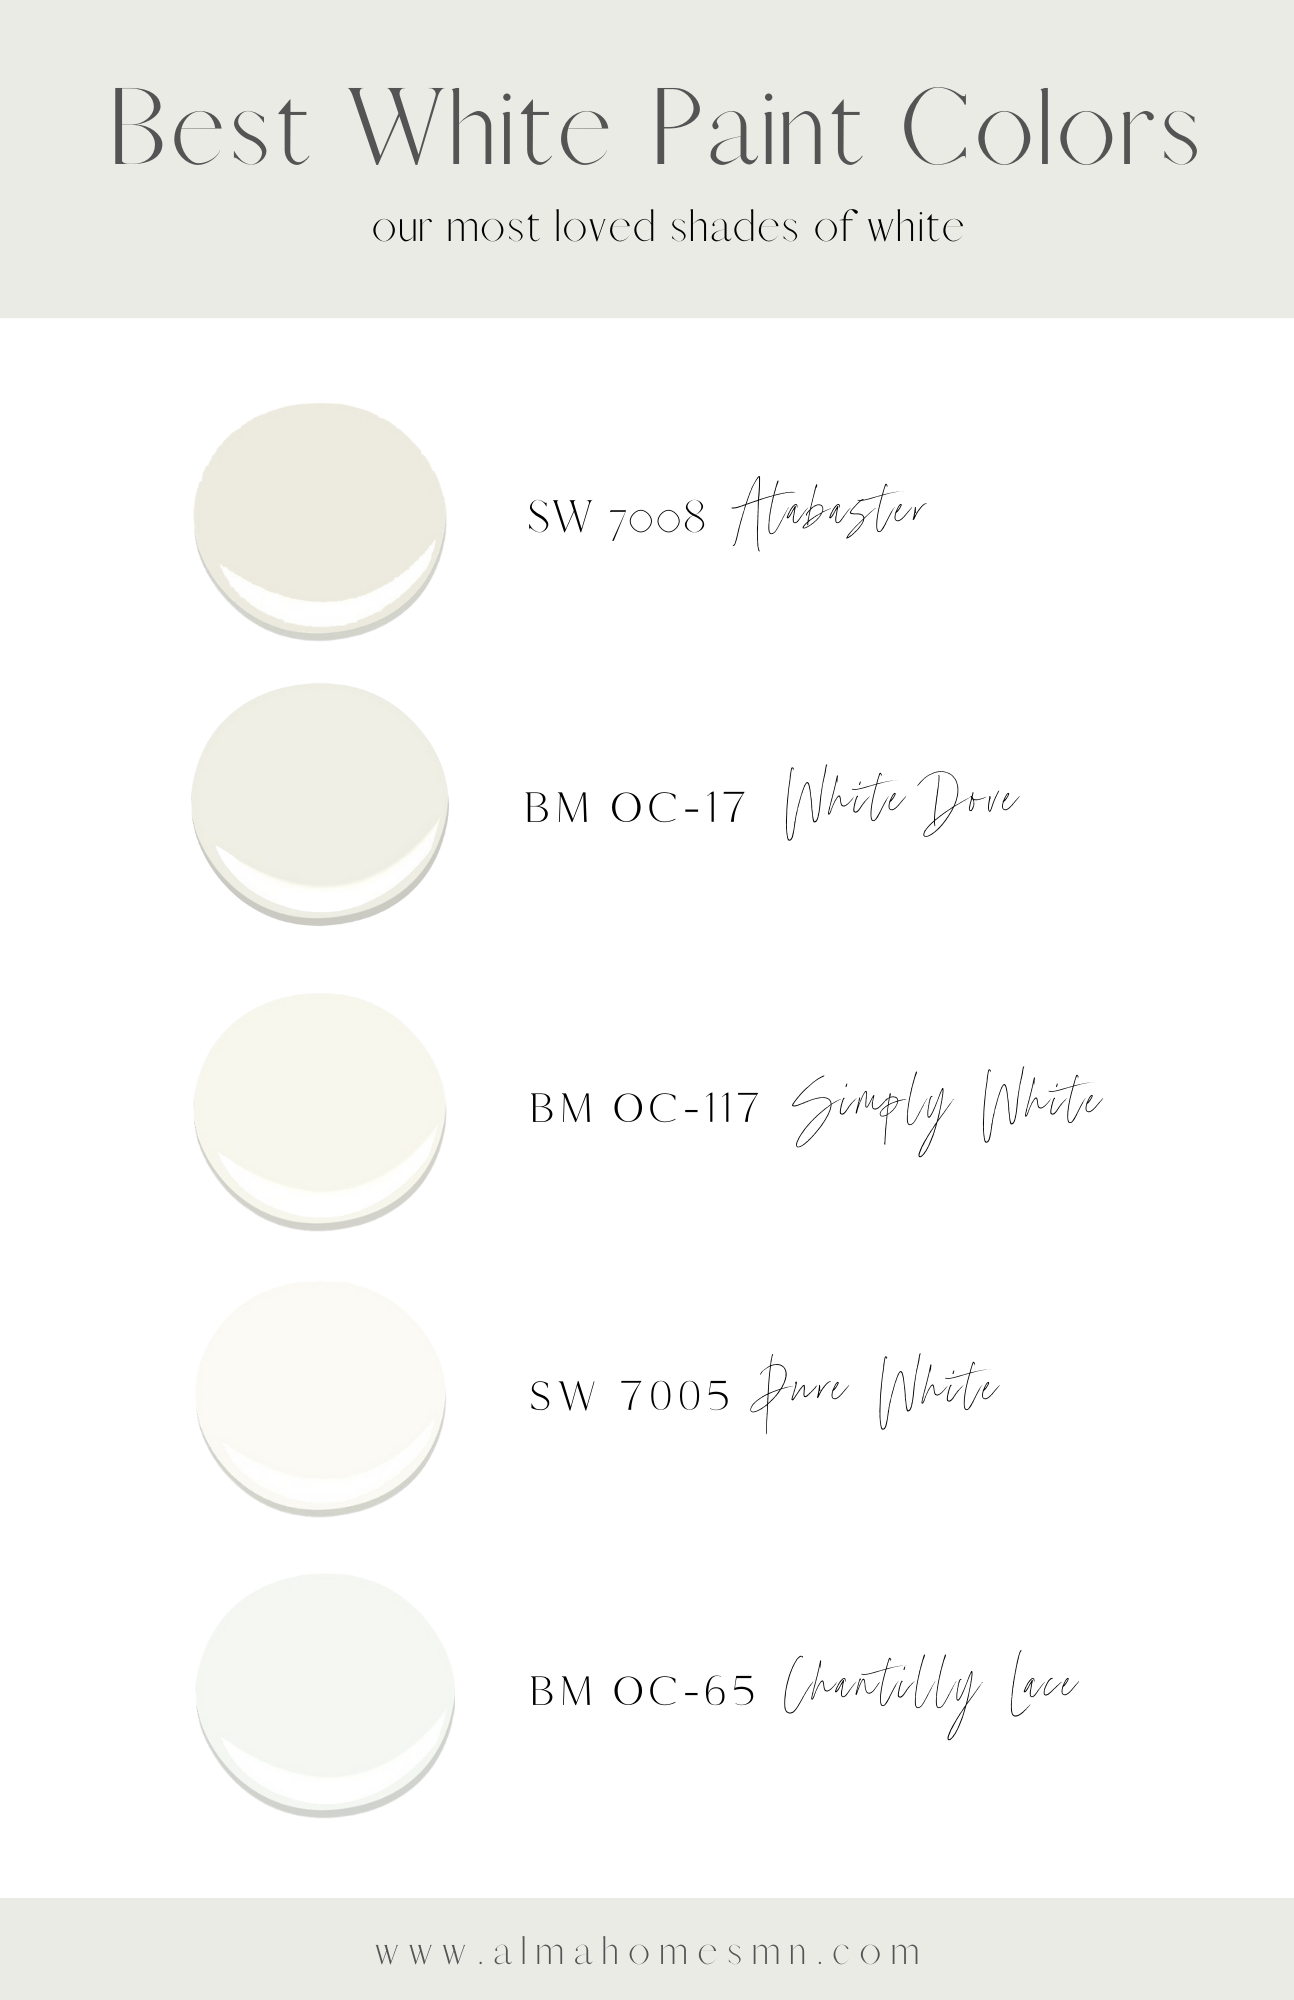 The Best White Paint Colors For Your Home | Alma Homes